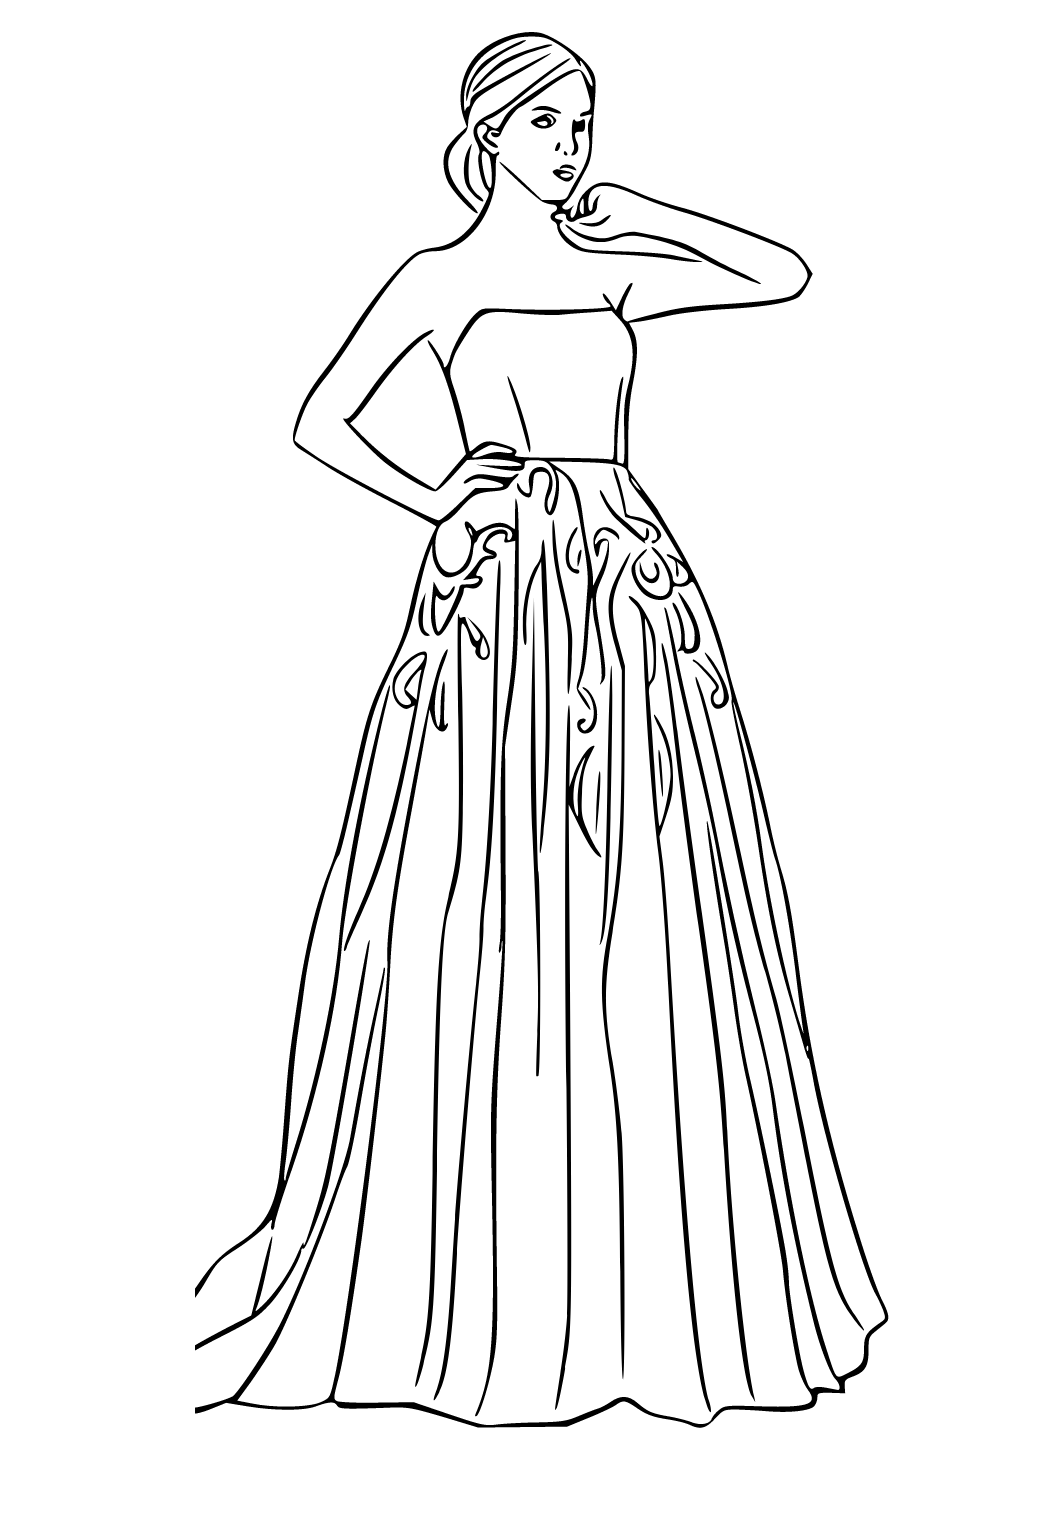 Dress coloring page | Free Printable Coloring Pages